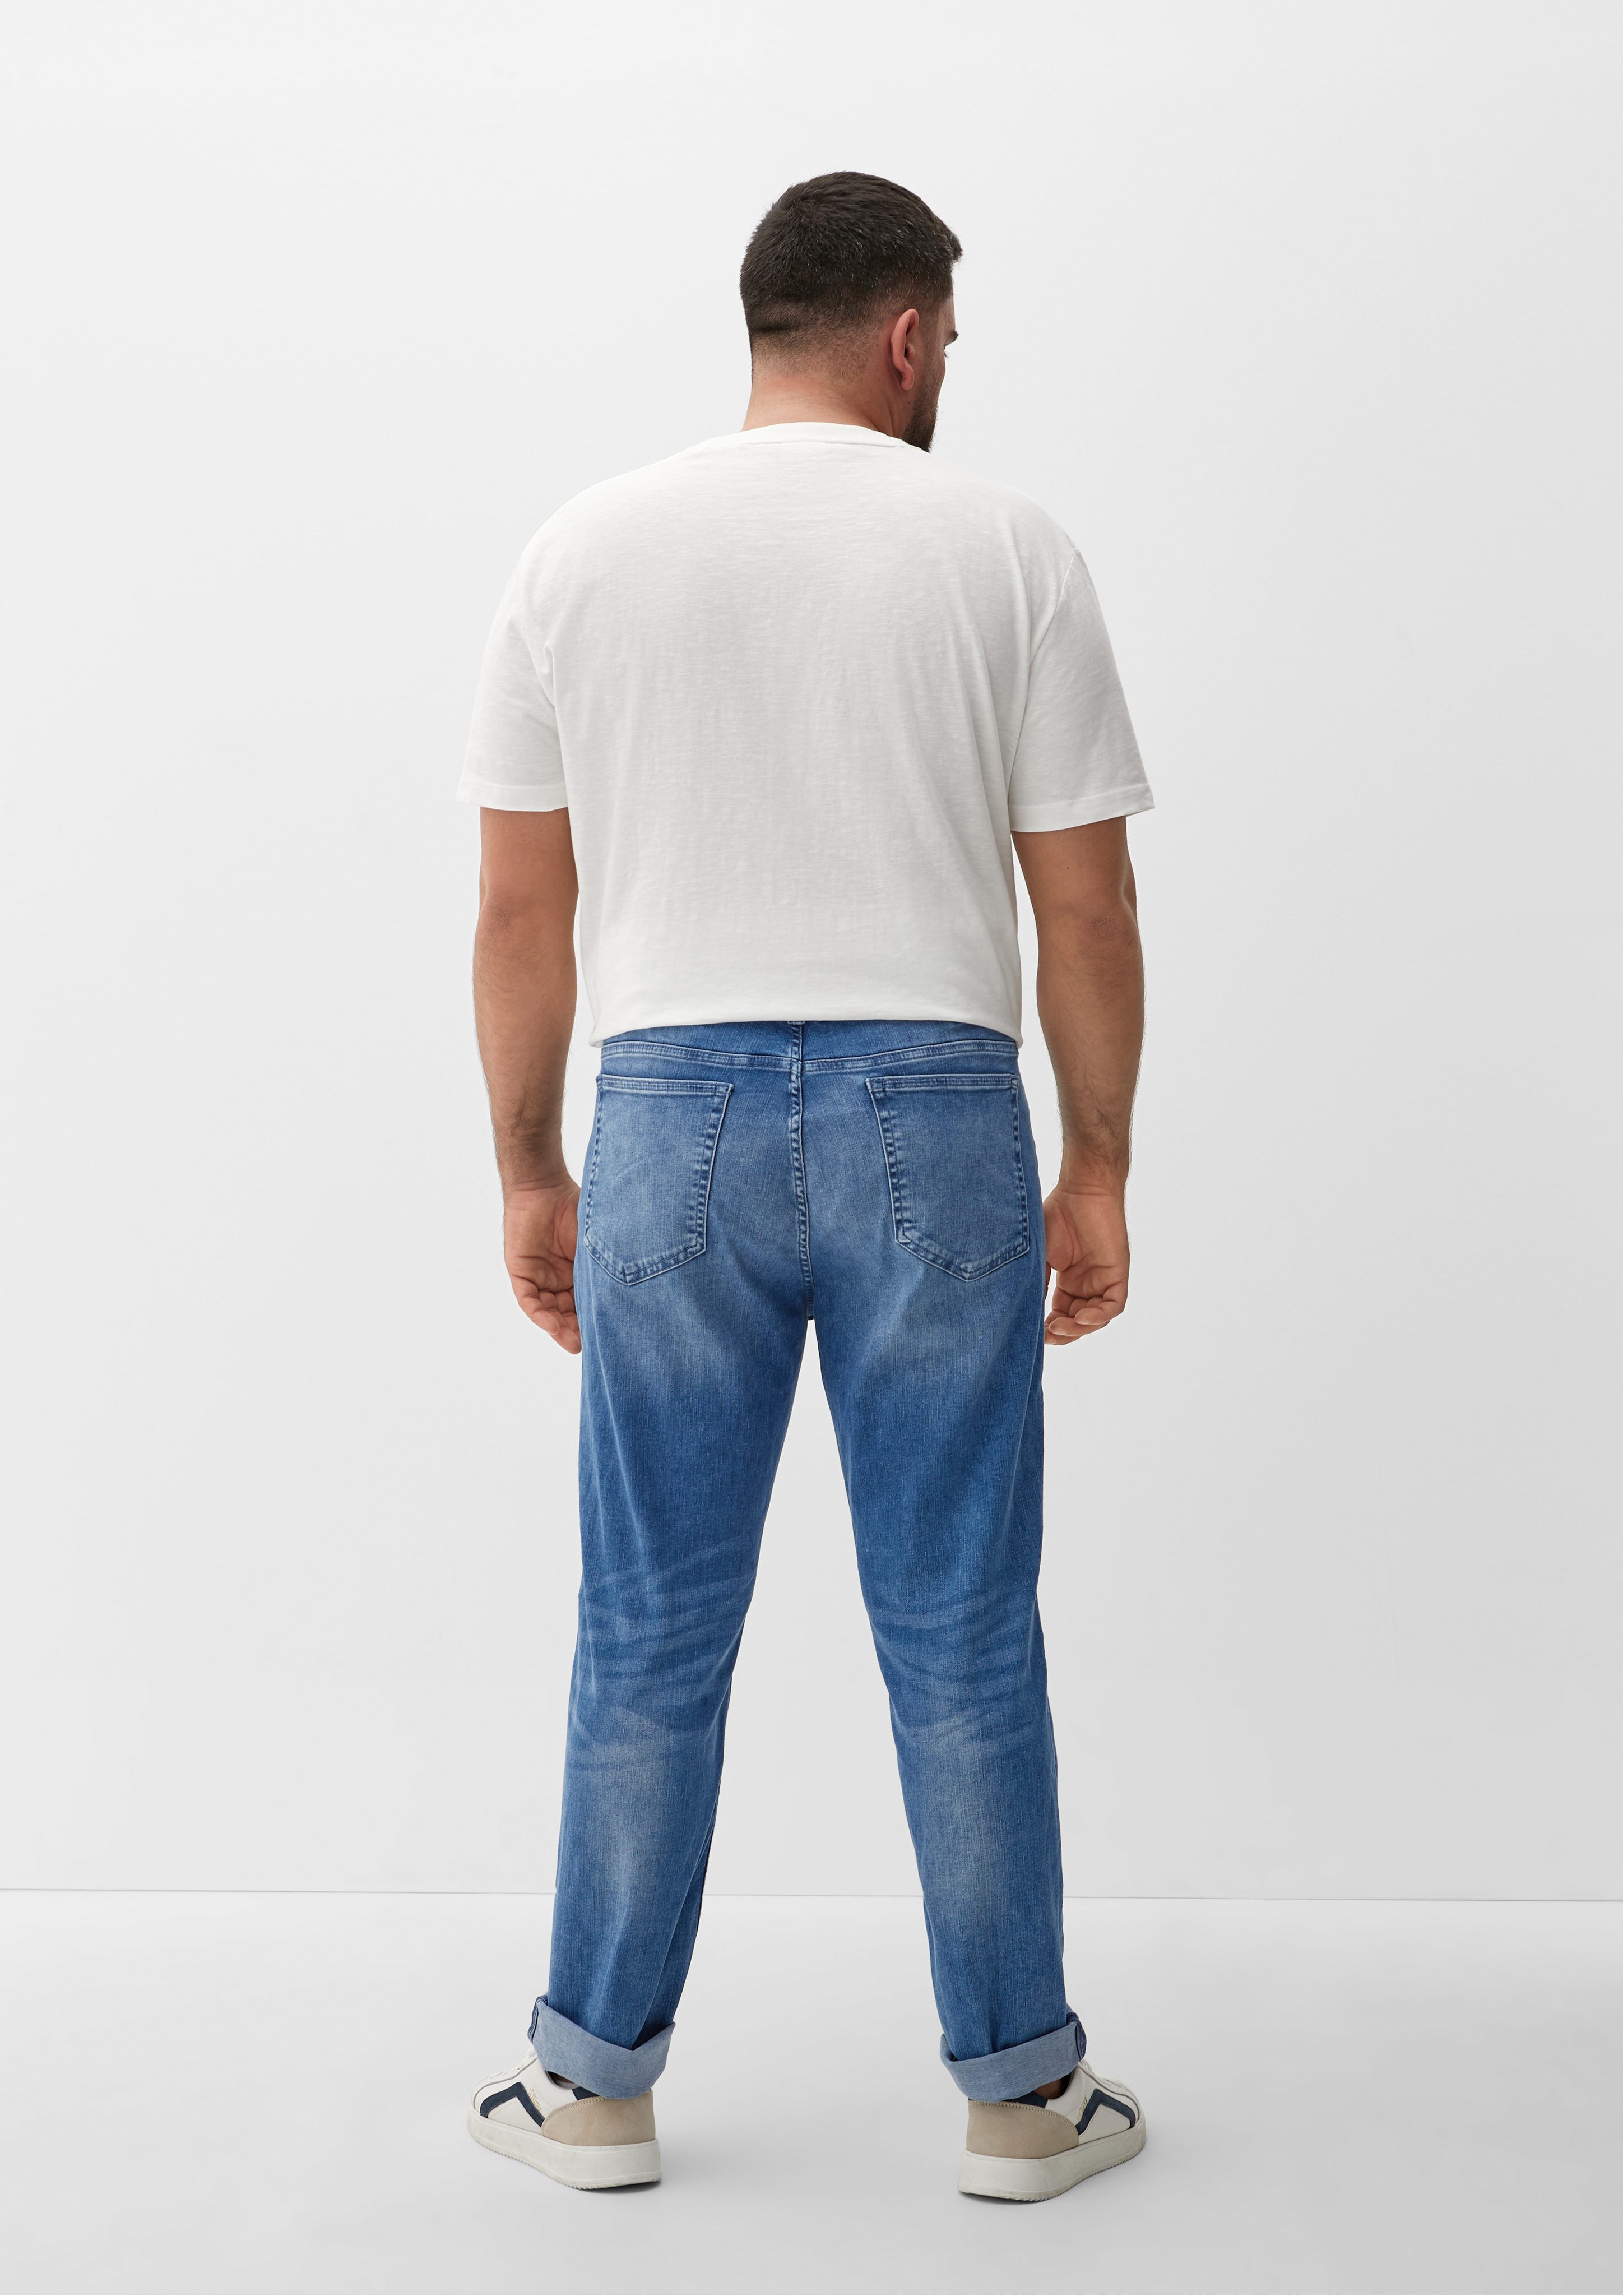 Mid Rise / Casby / Straight Leg Relaxed / Stoffhose s.Oliver Jeans Fit Waschung ozeanblau